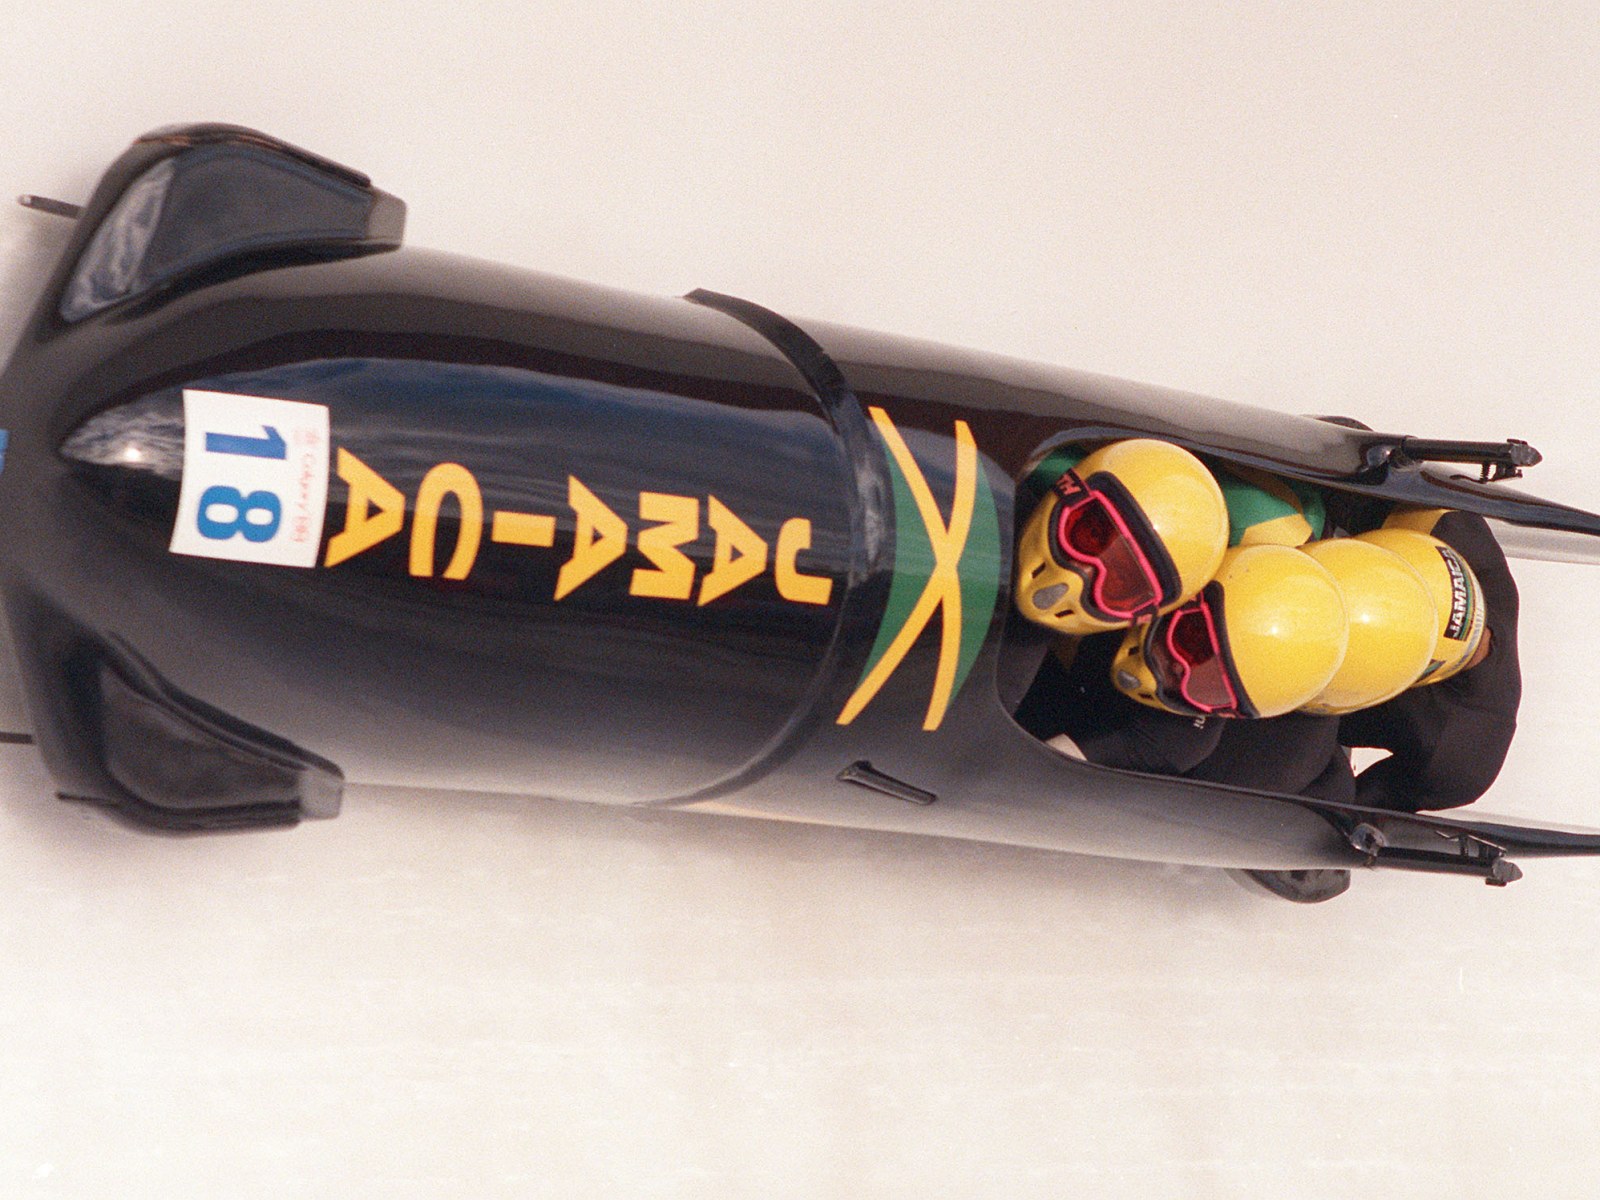 Bobsleigh Wallpapers